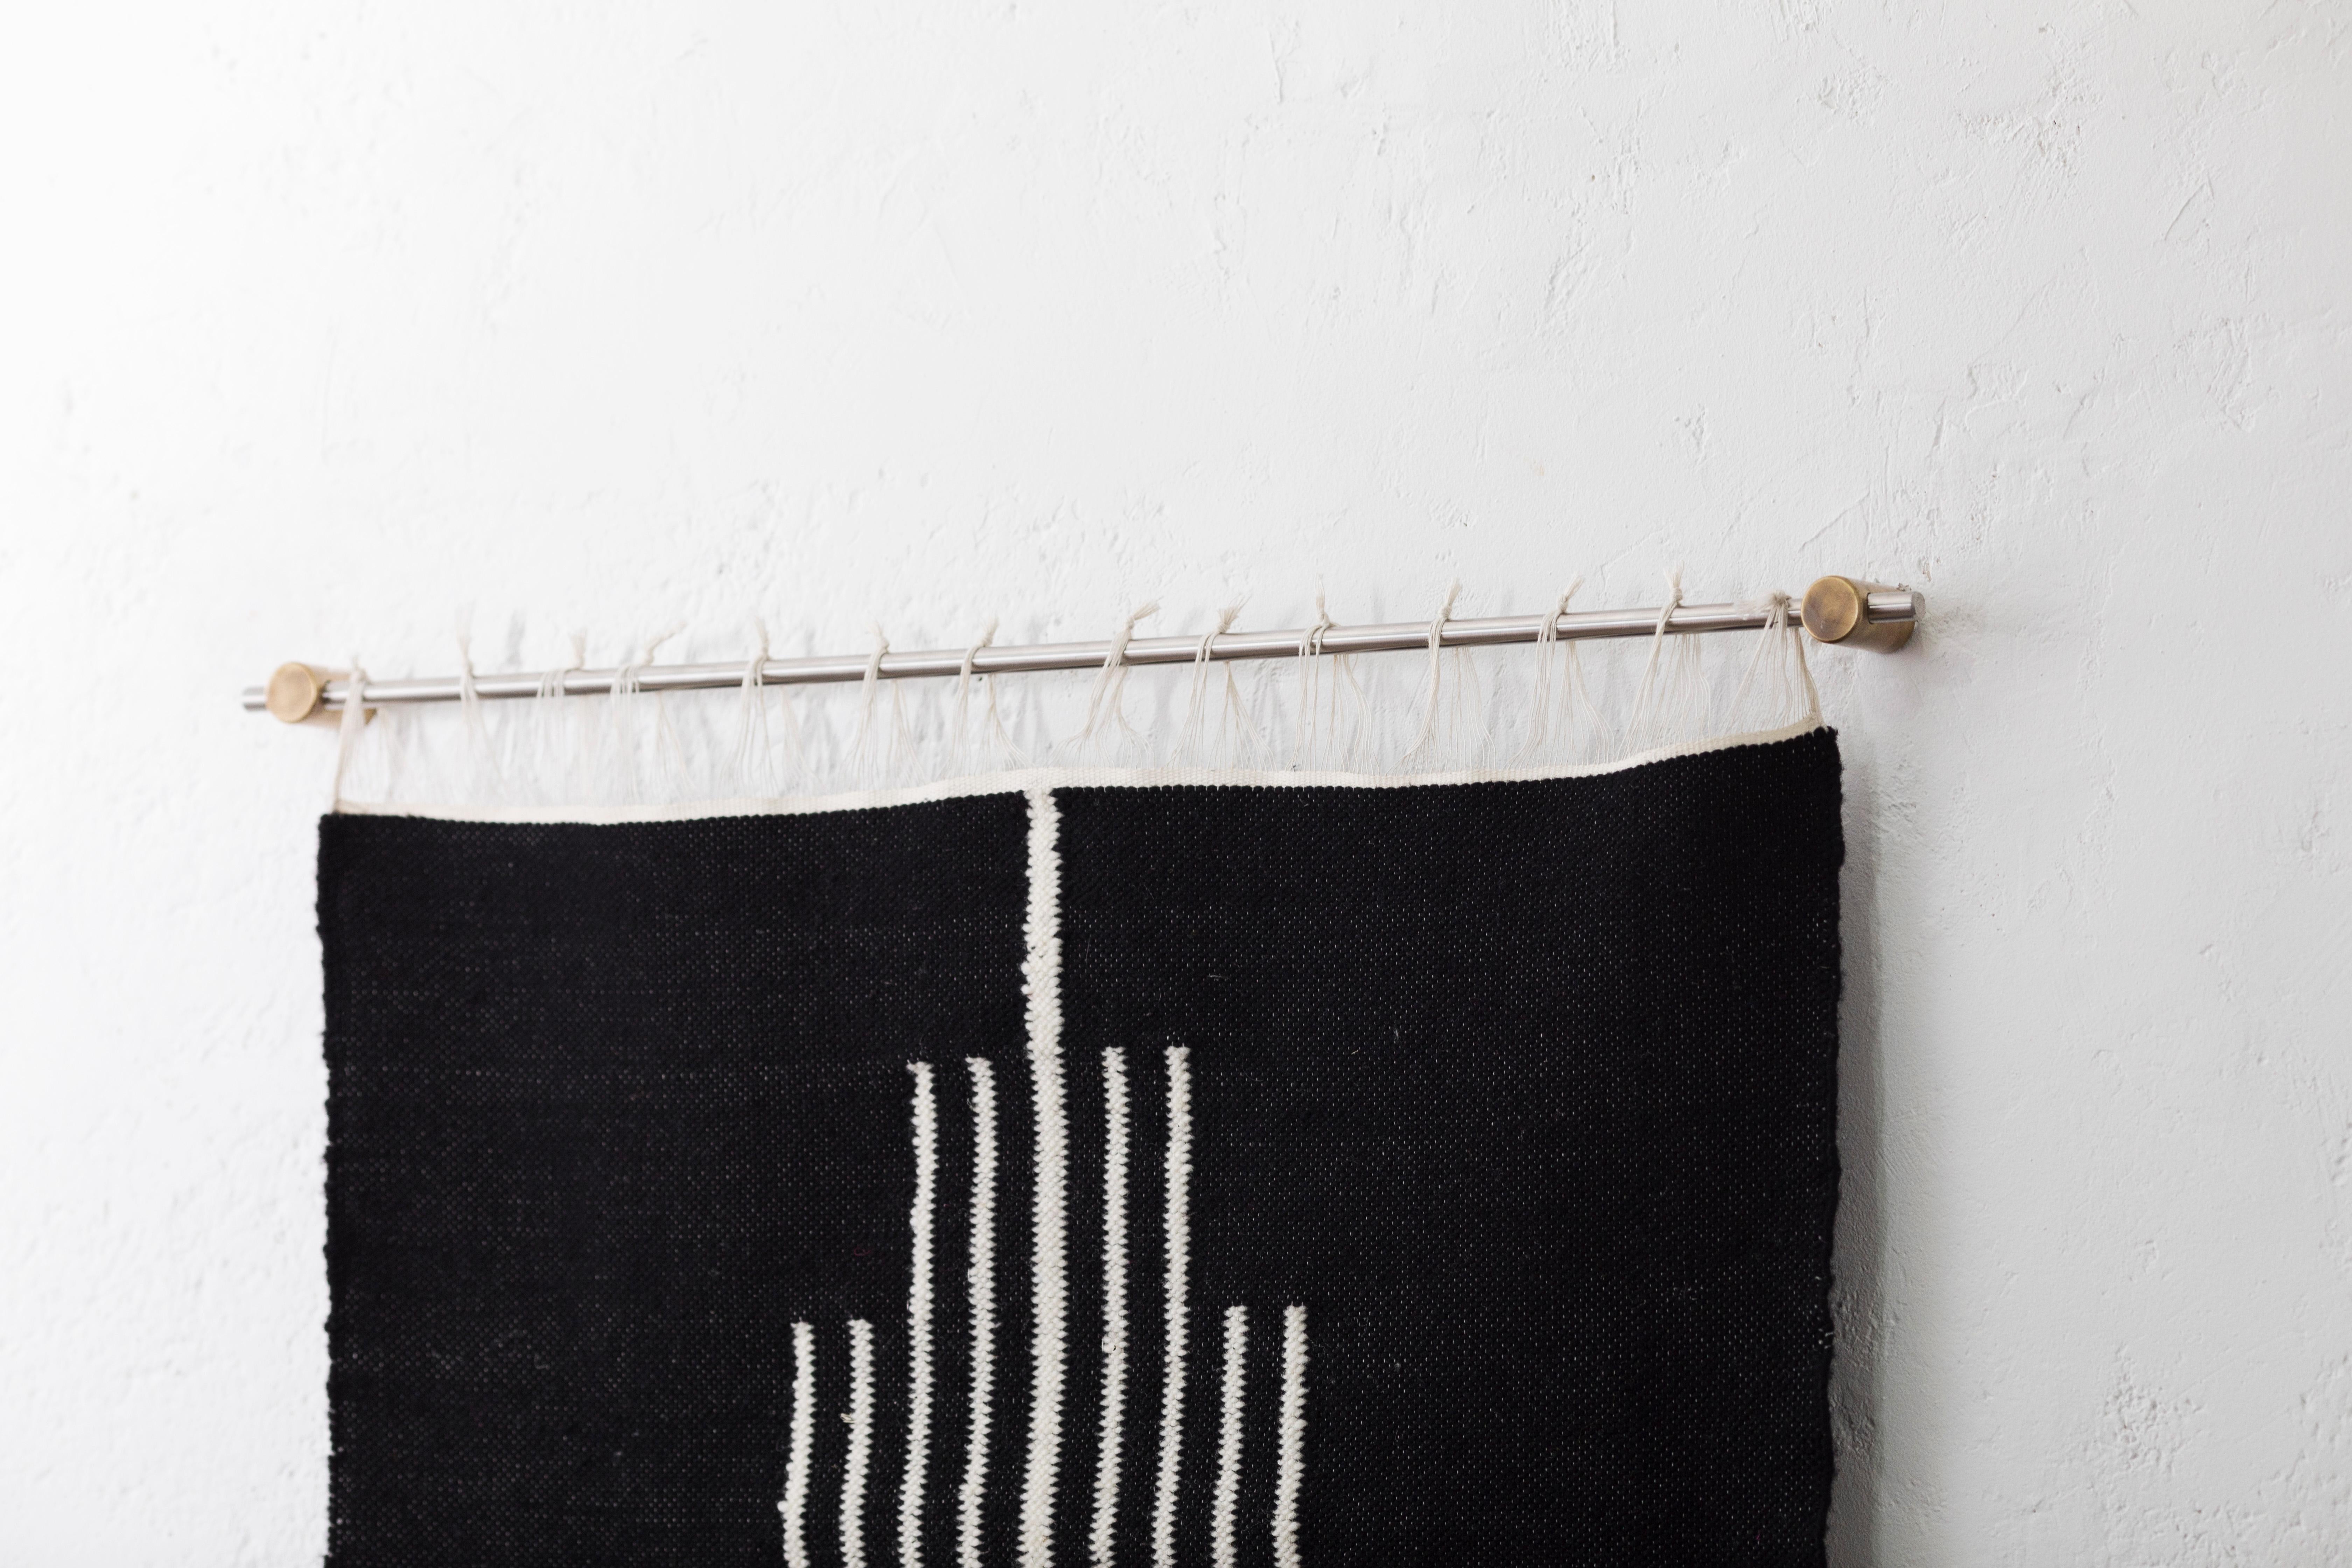 CENTRO Sheep Wool Handwoven Tapestry, Bronze w Stainless Steel Wall Mount, Black In New Condition For Sale In Quito, EC